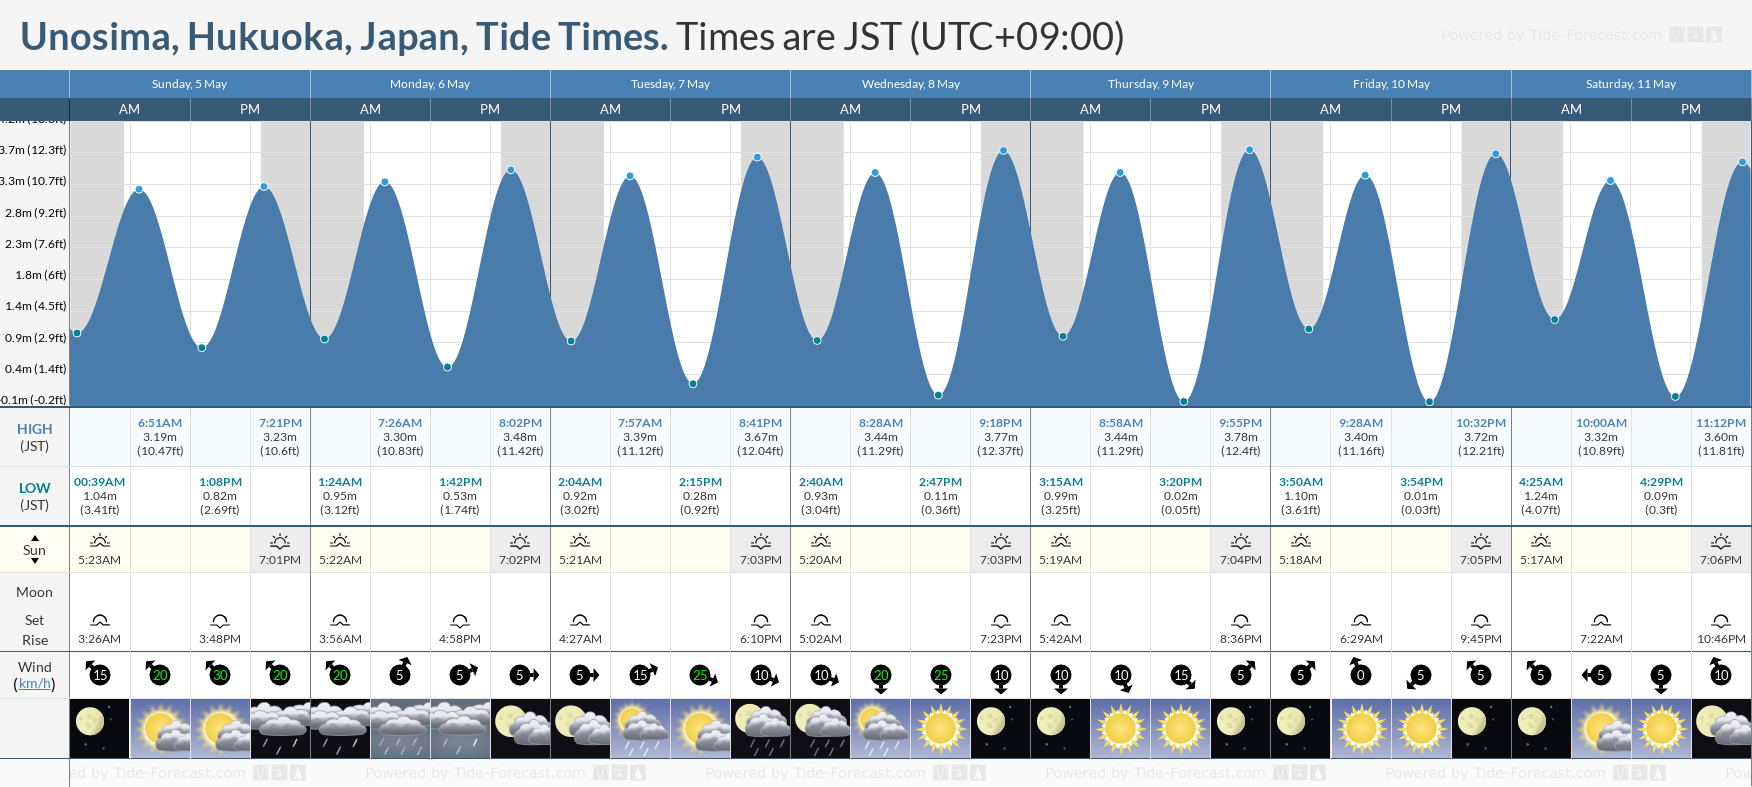 Unosima, Hukuoka, Japan Tide Chart including high and low tide tide times for the next 7 days